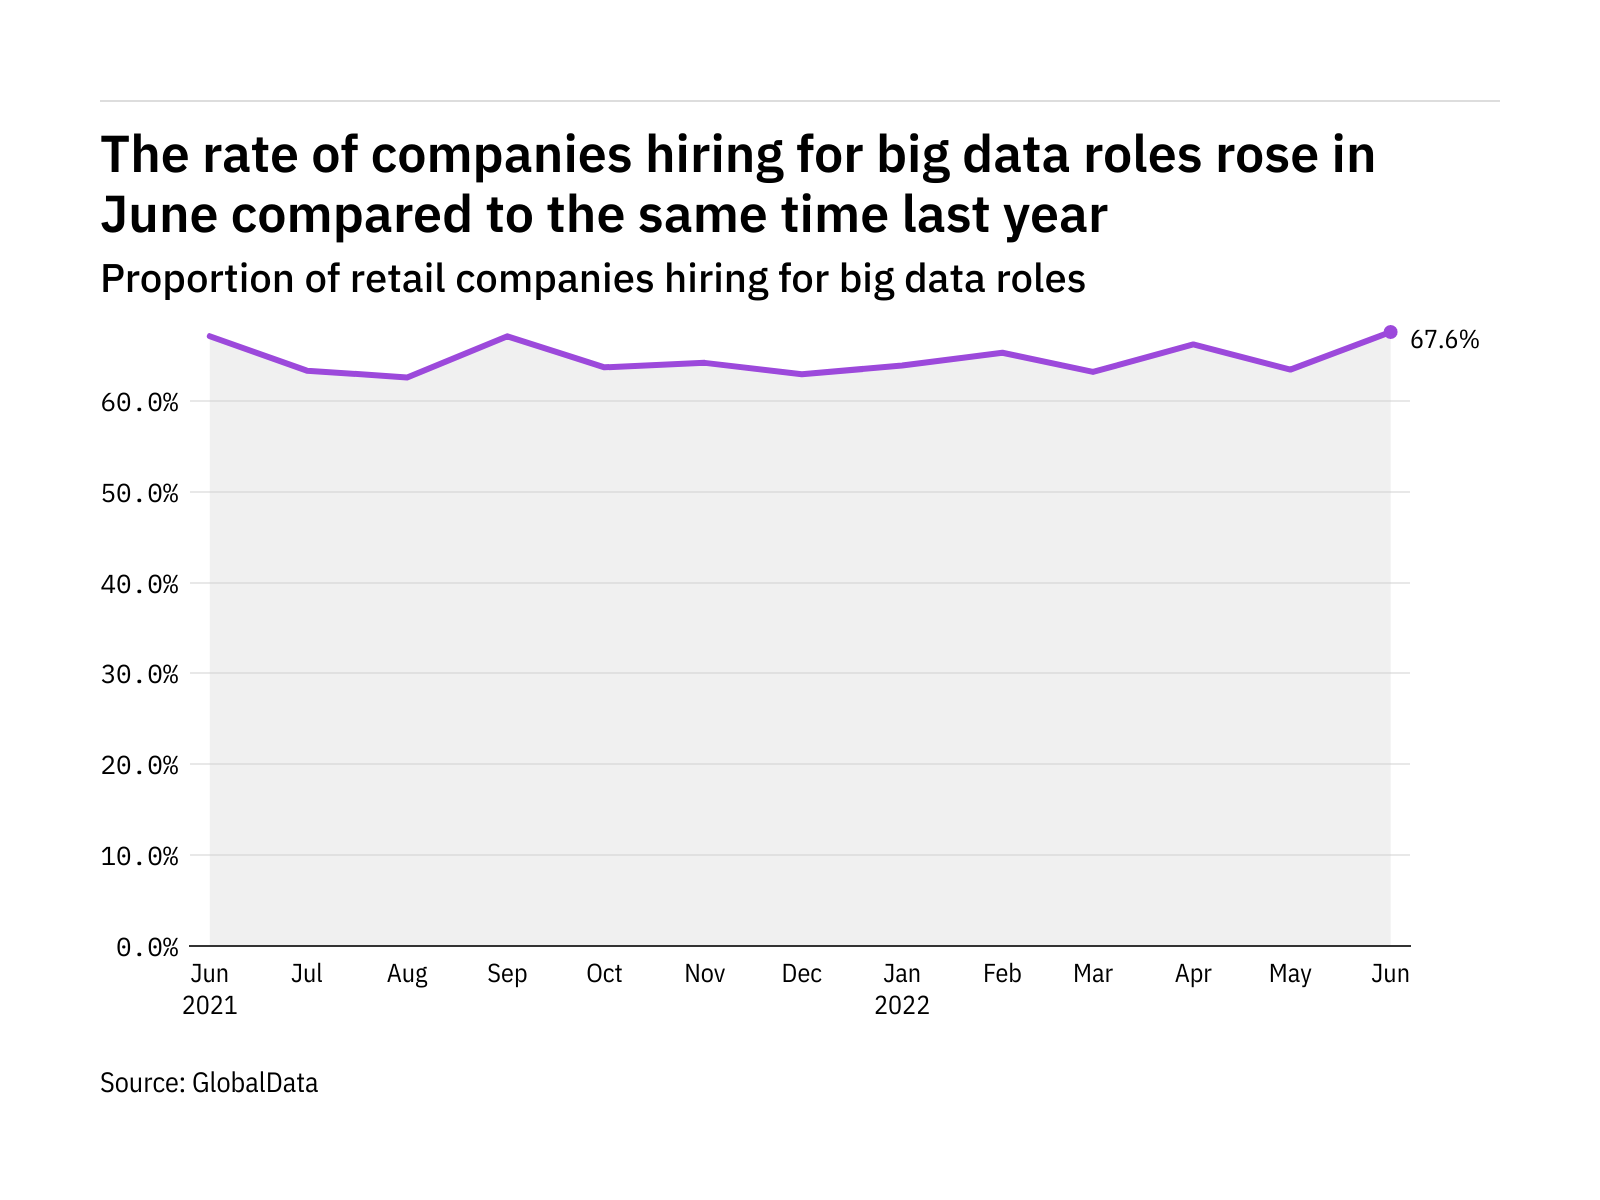 Big data hiring levels in the retail industry rose to a year-high in June 2022